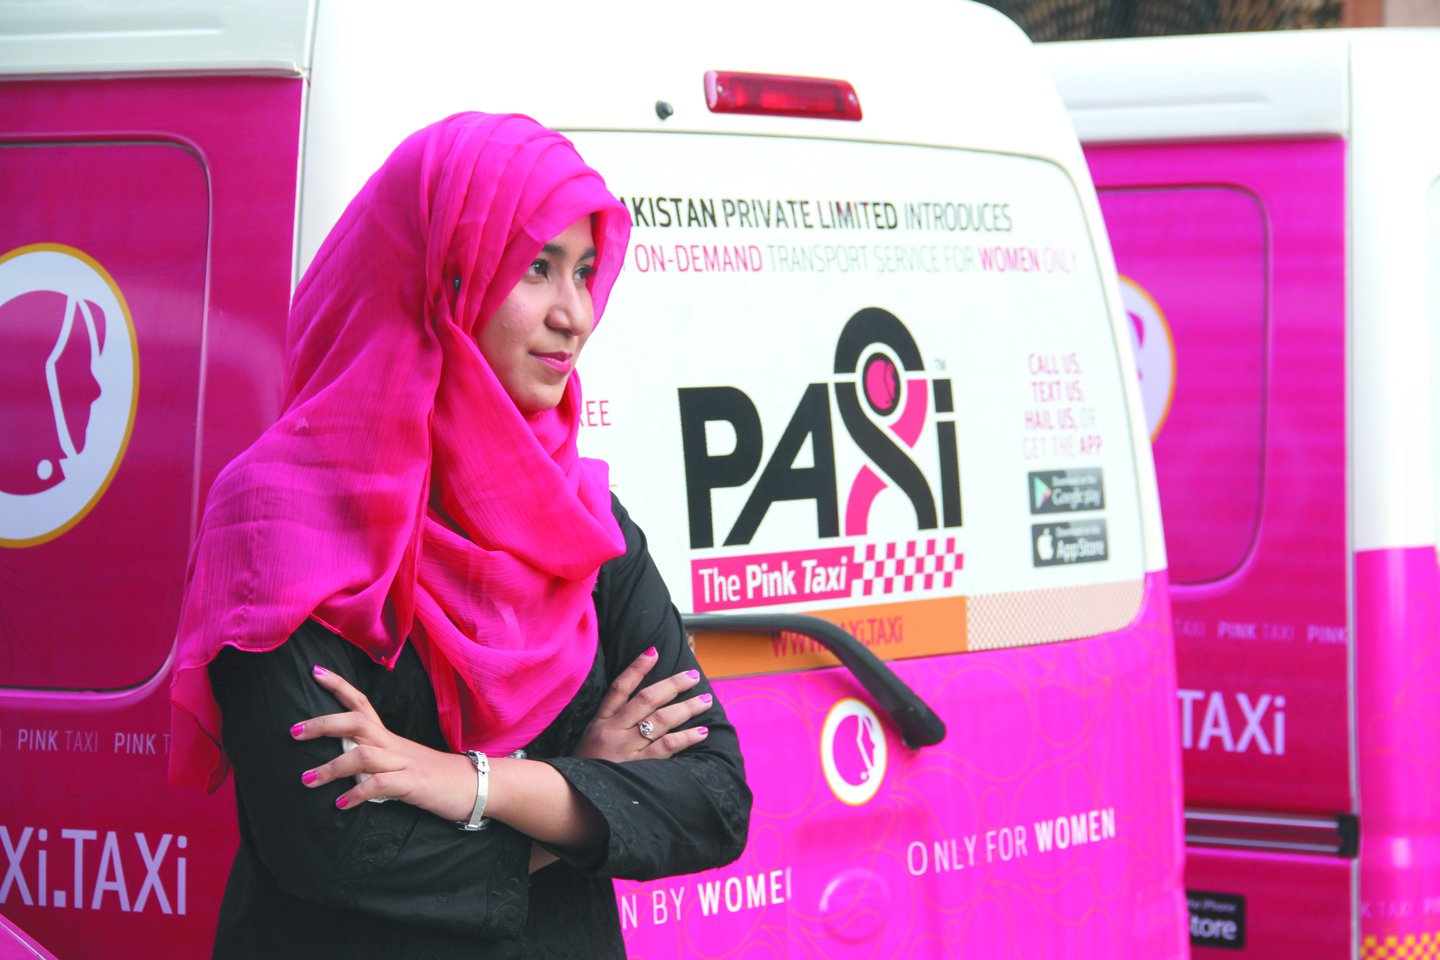 new taxi in town paxi has a total of 33 vehicles with 12 pink taxis 6 paxi taxis and 15 bike taxis according to paxi manager shahrukh shah photo ayesha mir express